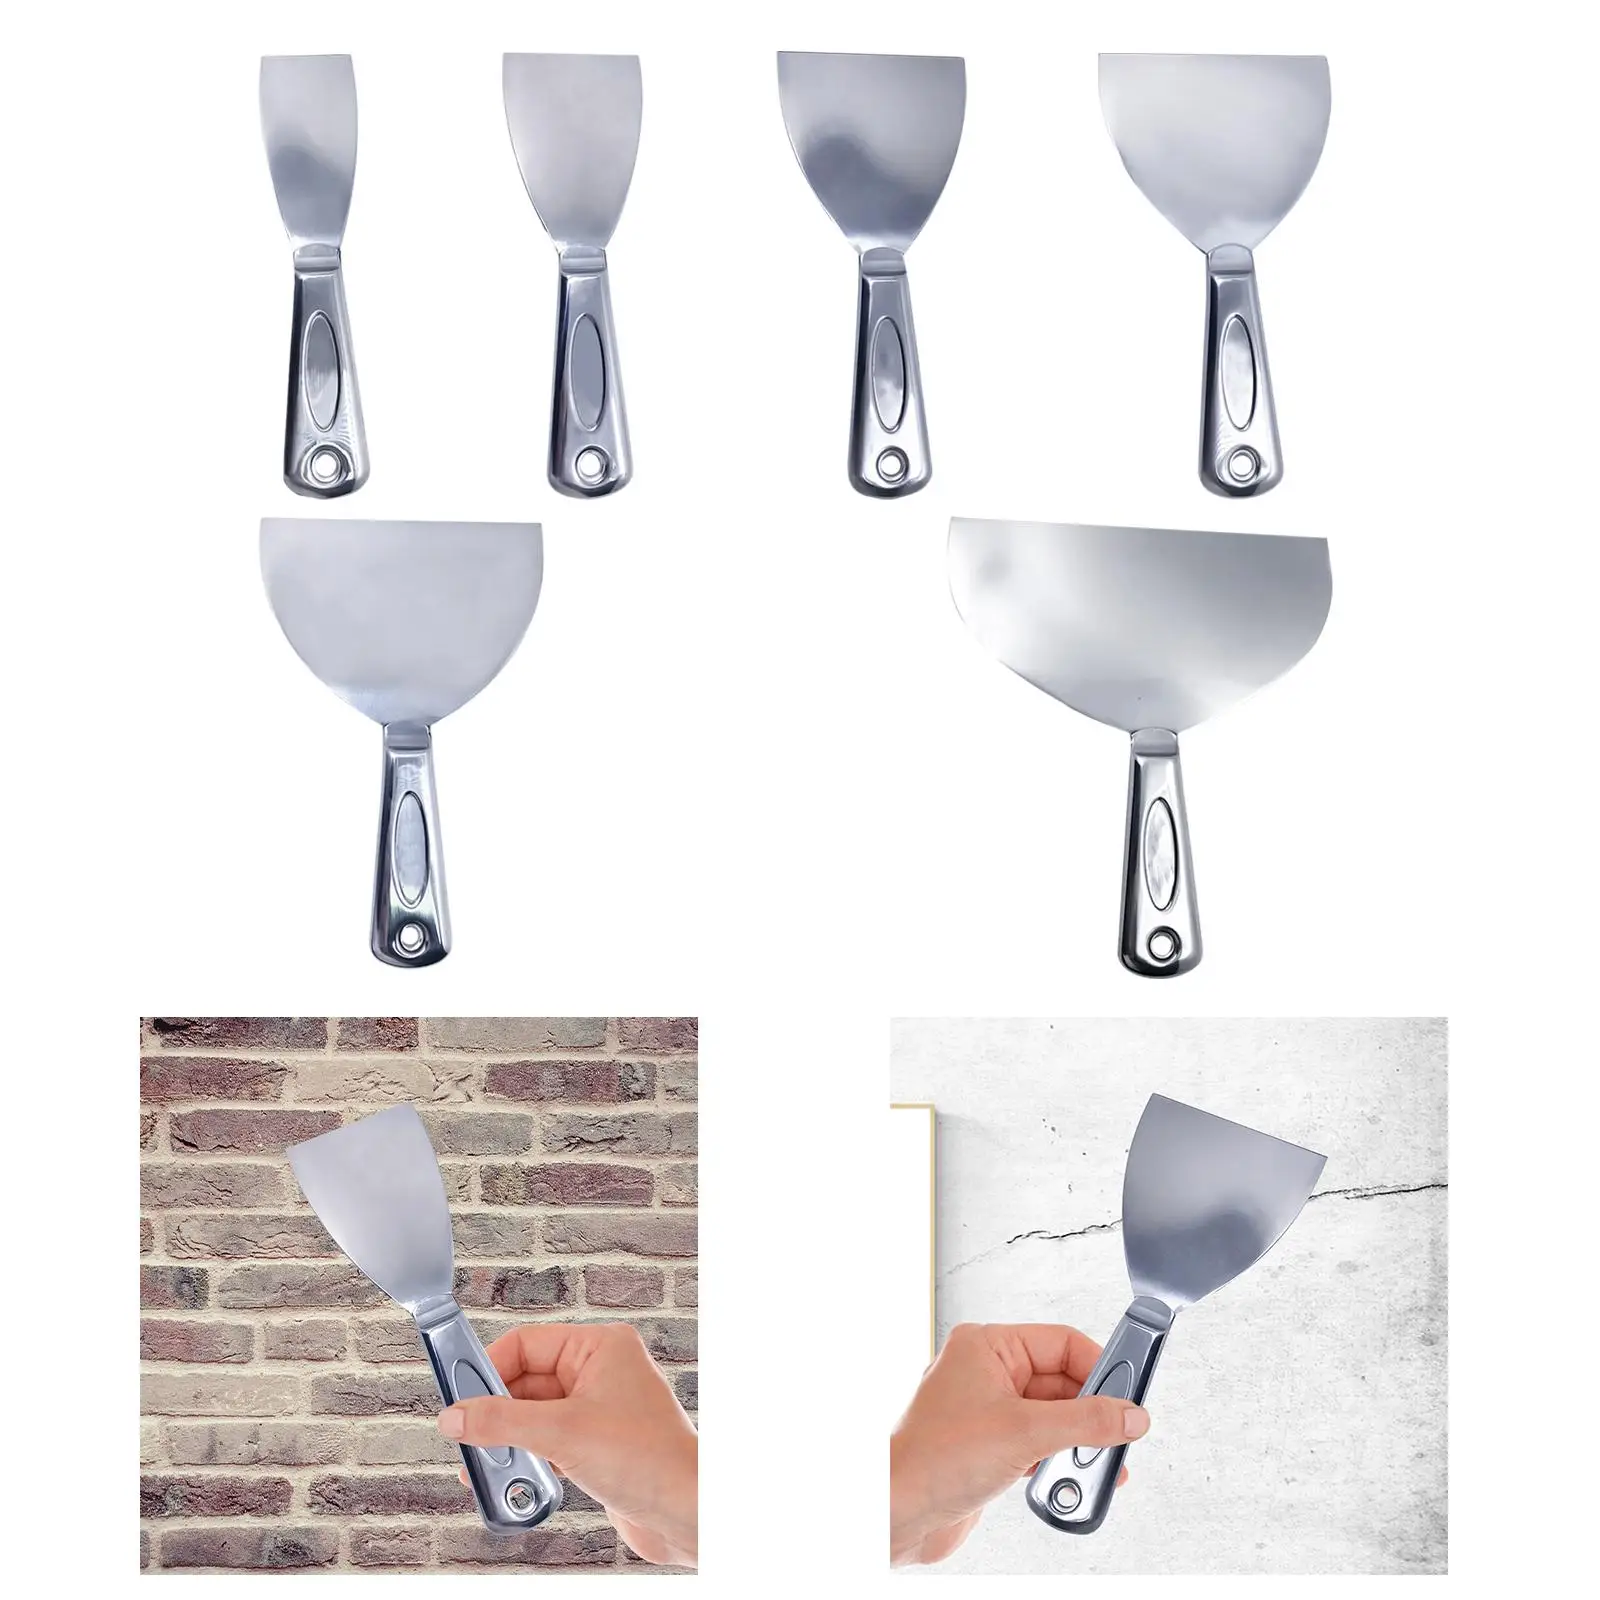 Putty Knife Hands Tool Drywall Finishing Flexible Cleaning Tool Plaster Scraping 1x Steel Knife Tool Spatula Wallpaper Scraper